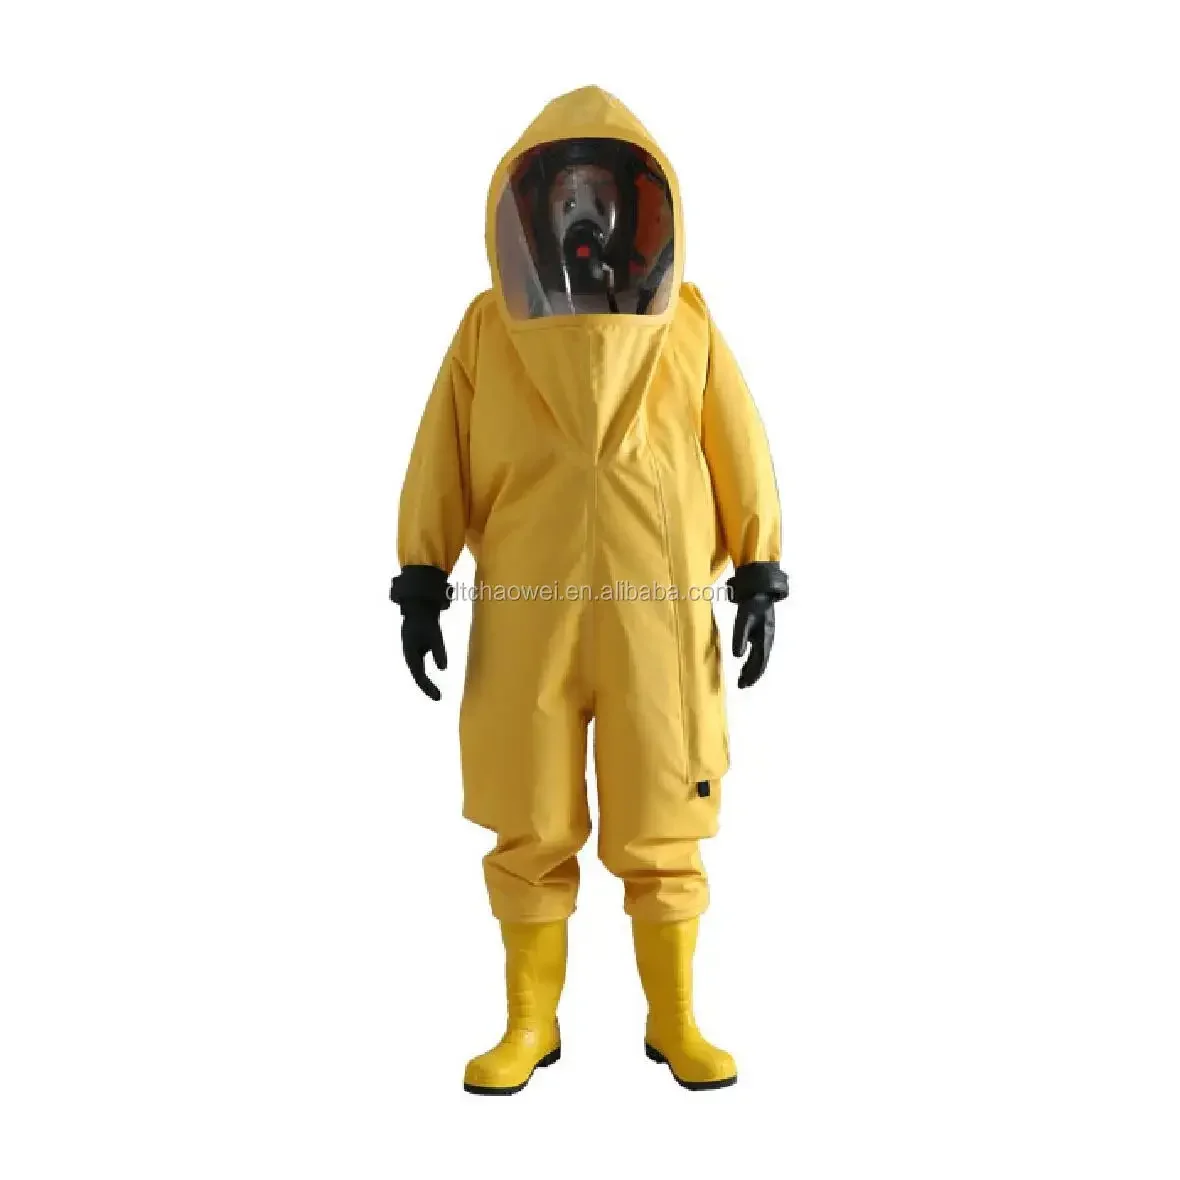 Discover more than 198 radiation suit material latest